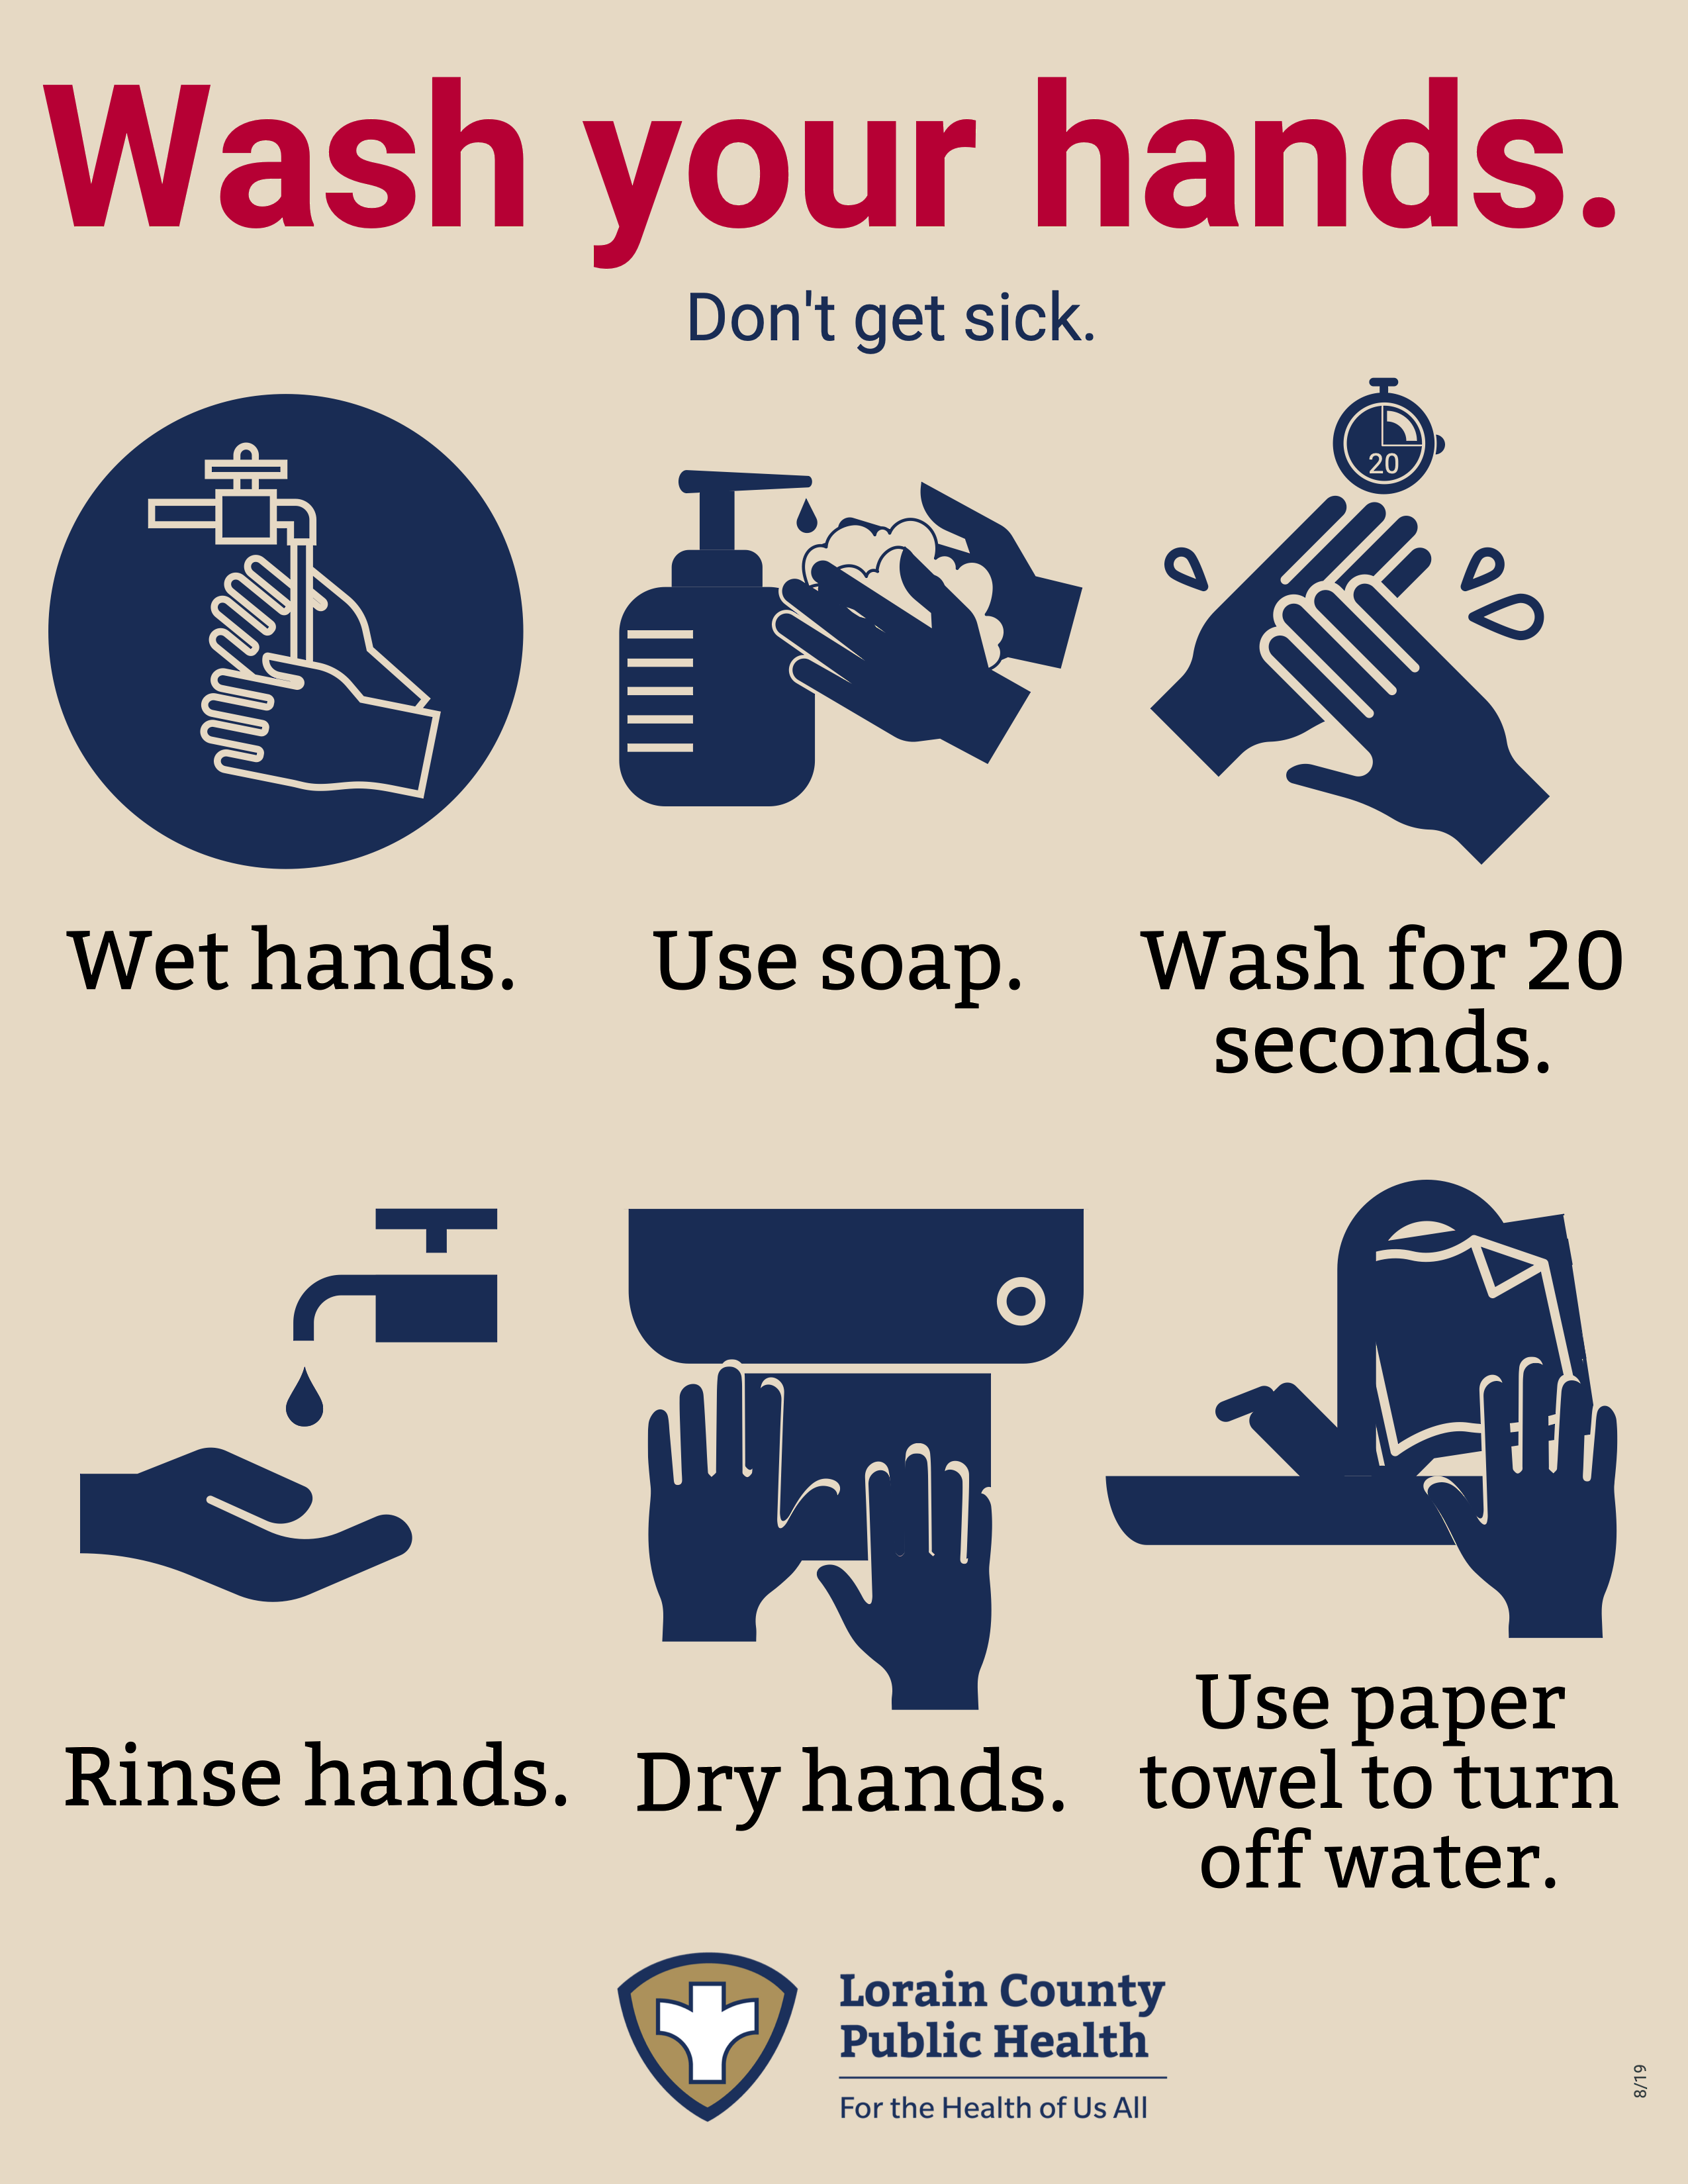 https://www.loraincountyhealth.com/files/sliders/frames/17/2021/05/FINAL_Food_Safety_infographics_hand_washing.png